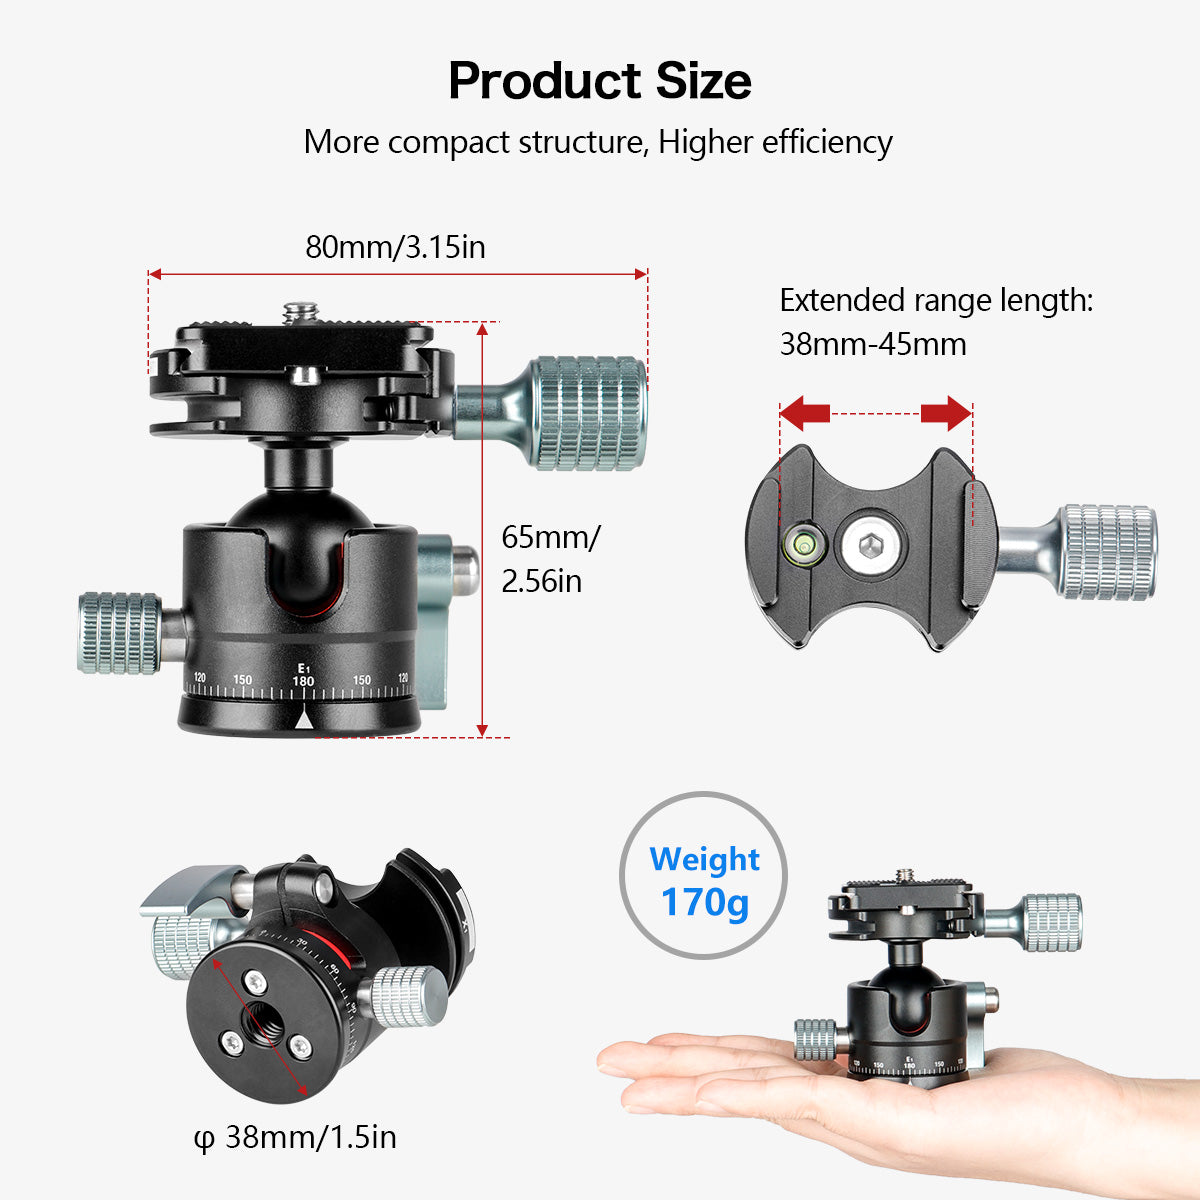 Low-Profile Mini Ball Head 28mm ball diameter with 1/4" Screw Arca-Type QR Plate for Tripod,Slider and DSLR Cameras, Net weight only 170g / 0.38lbs